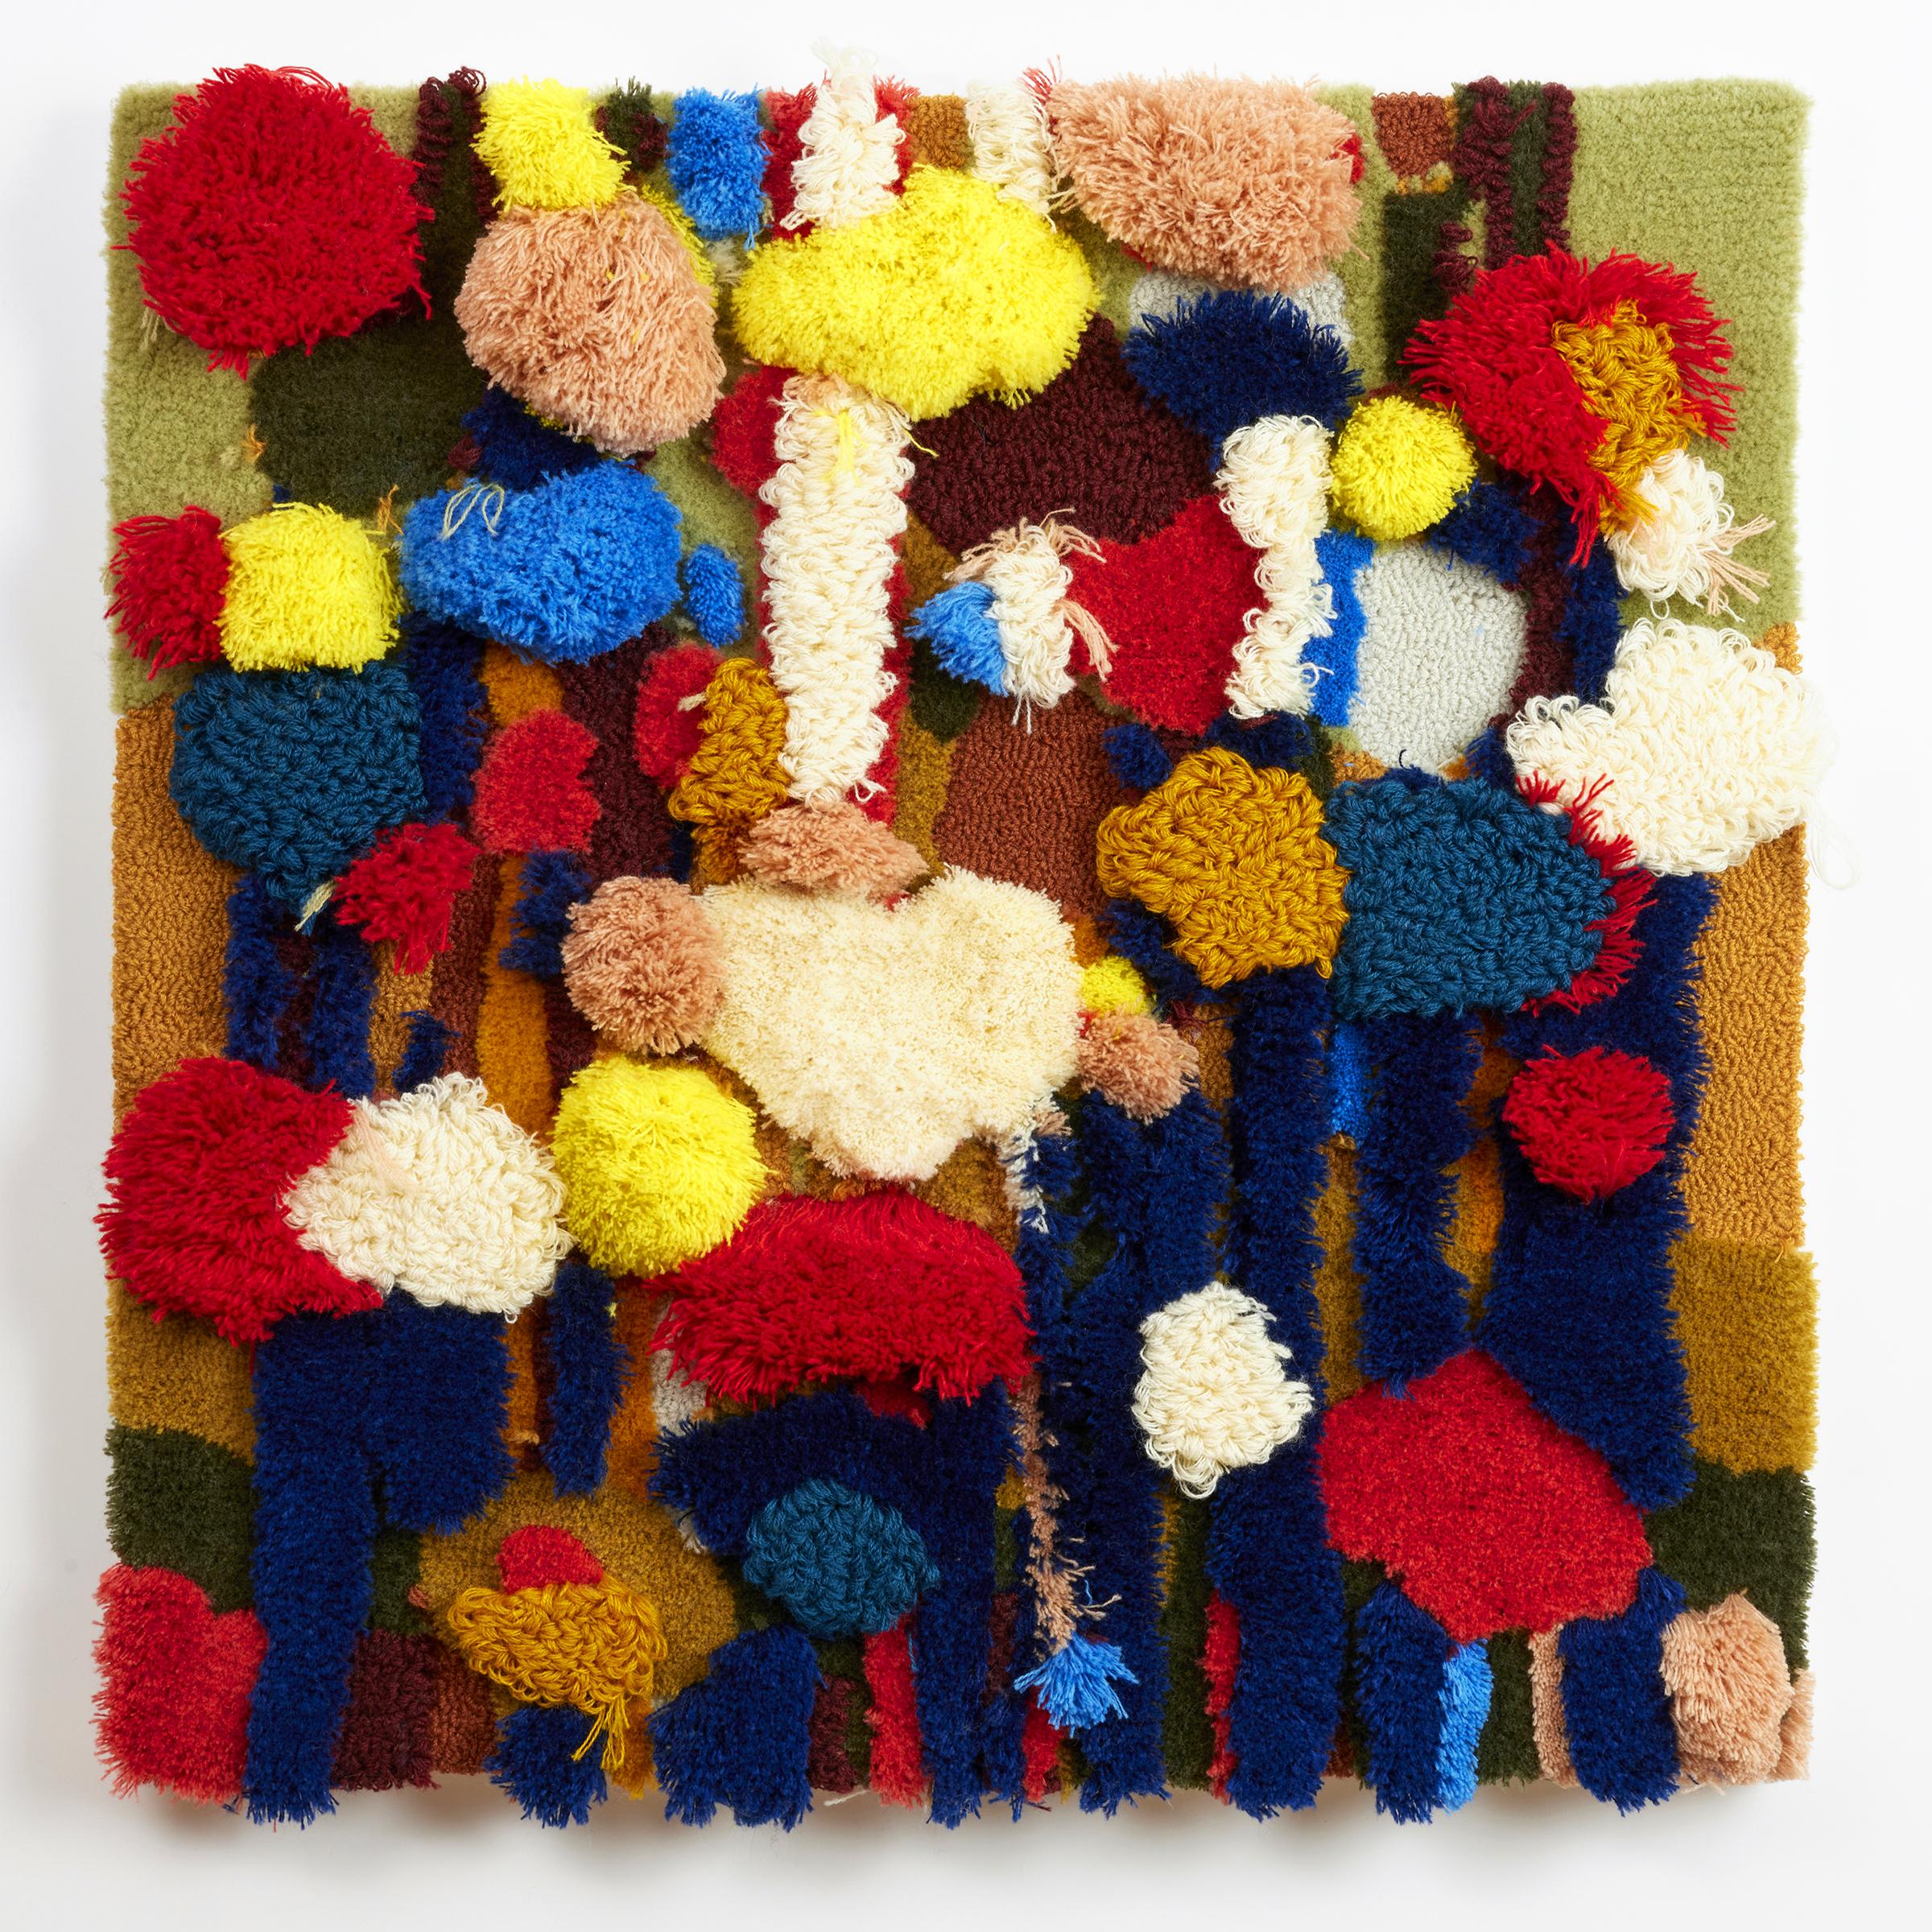 Trish Andersen Abstract Sculpture - 'Come What May' - contemporary fiber art, texture, pattern, dots, tufting